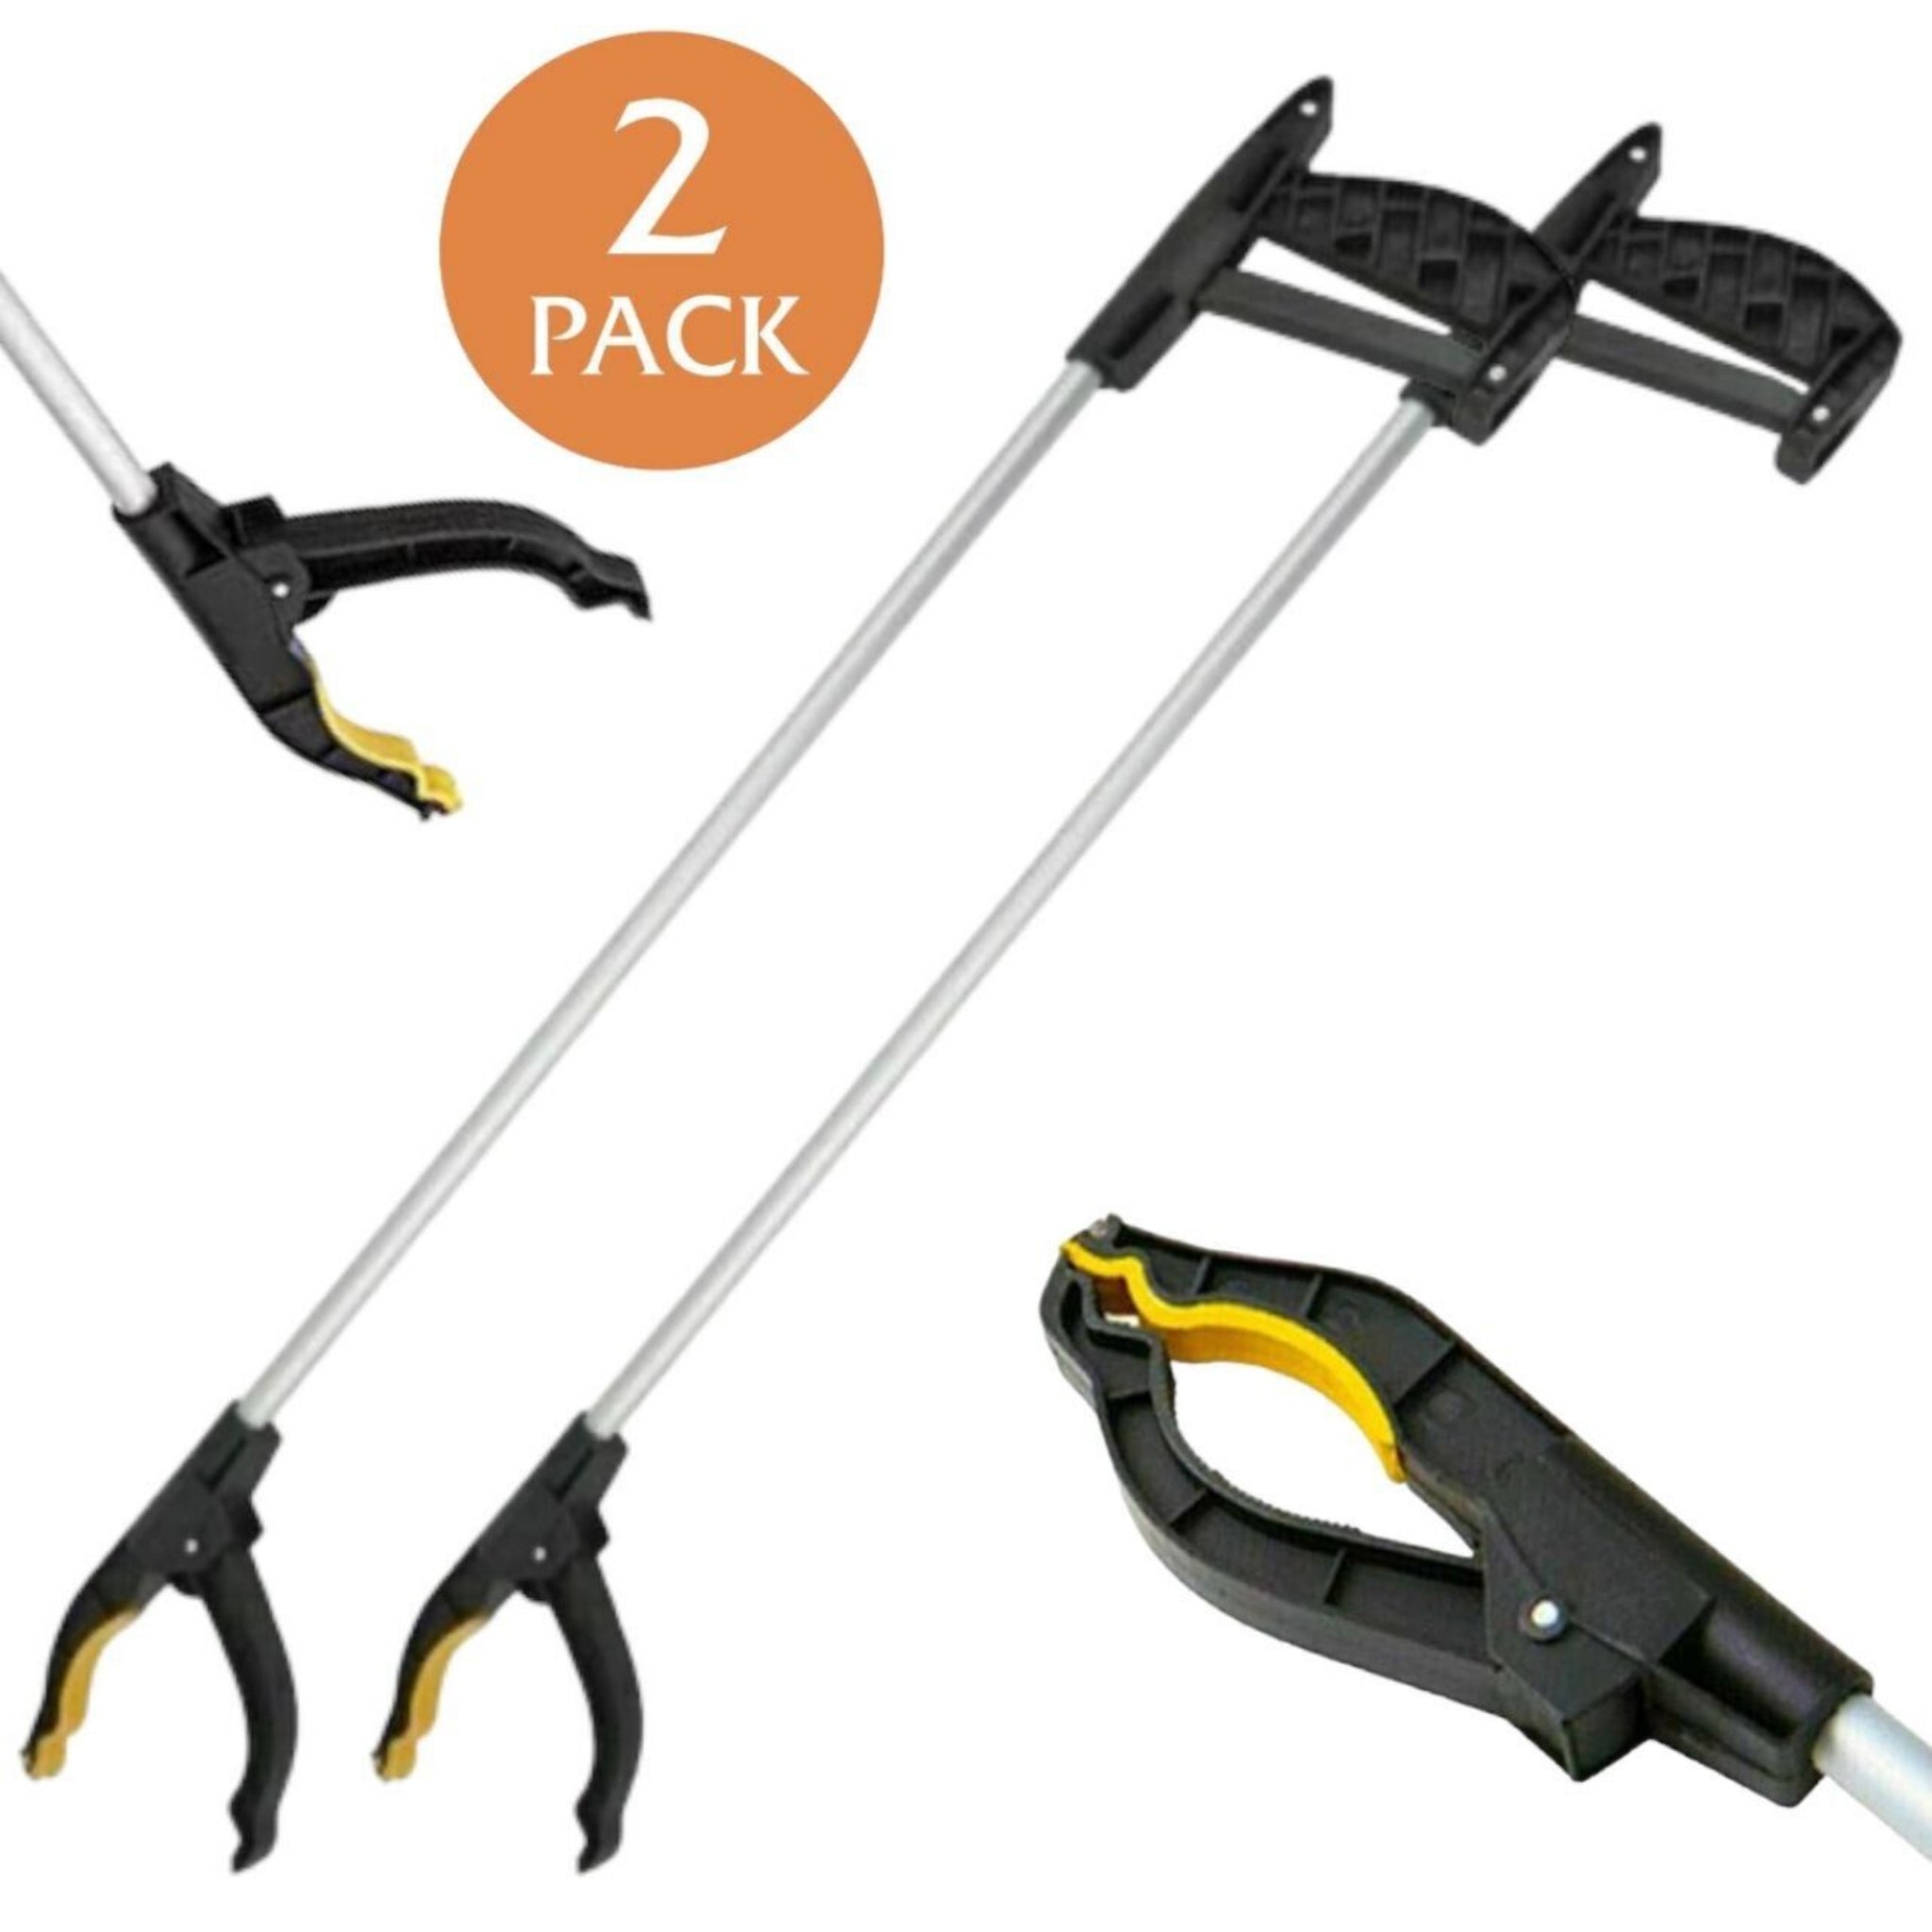 Beclen Harp 2pc 75cm Magnetic Tip Reacher Litter/Rubbish Picker/Grabber Mobility Tool-Perfect Helping Hand For Indoor And Outdoor Garbage Pick Up